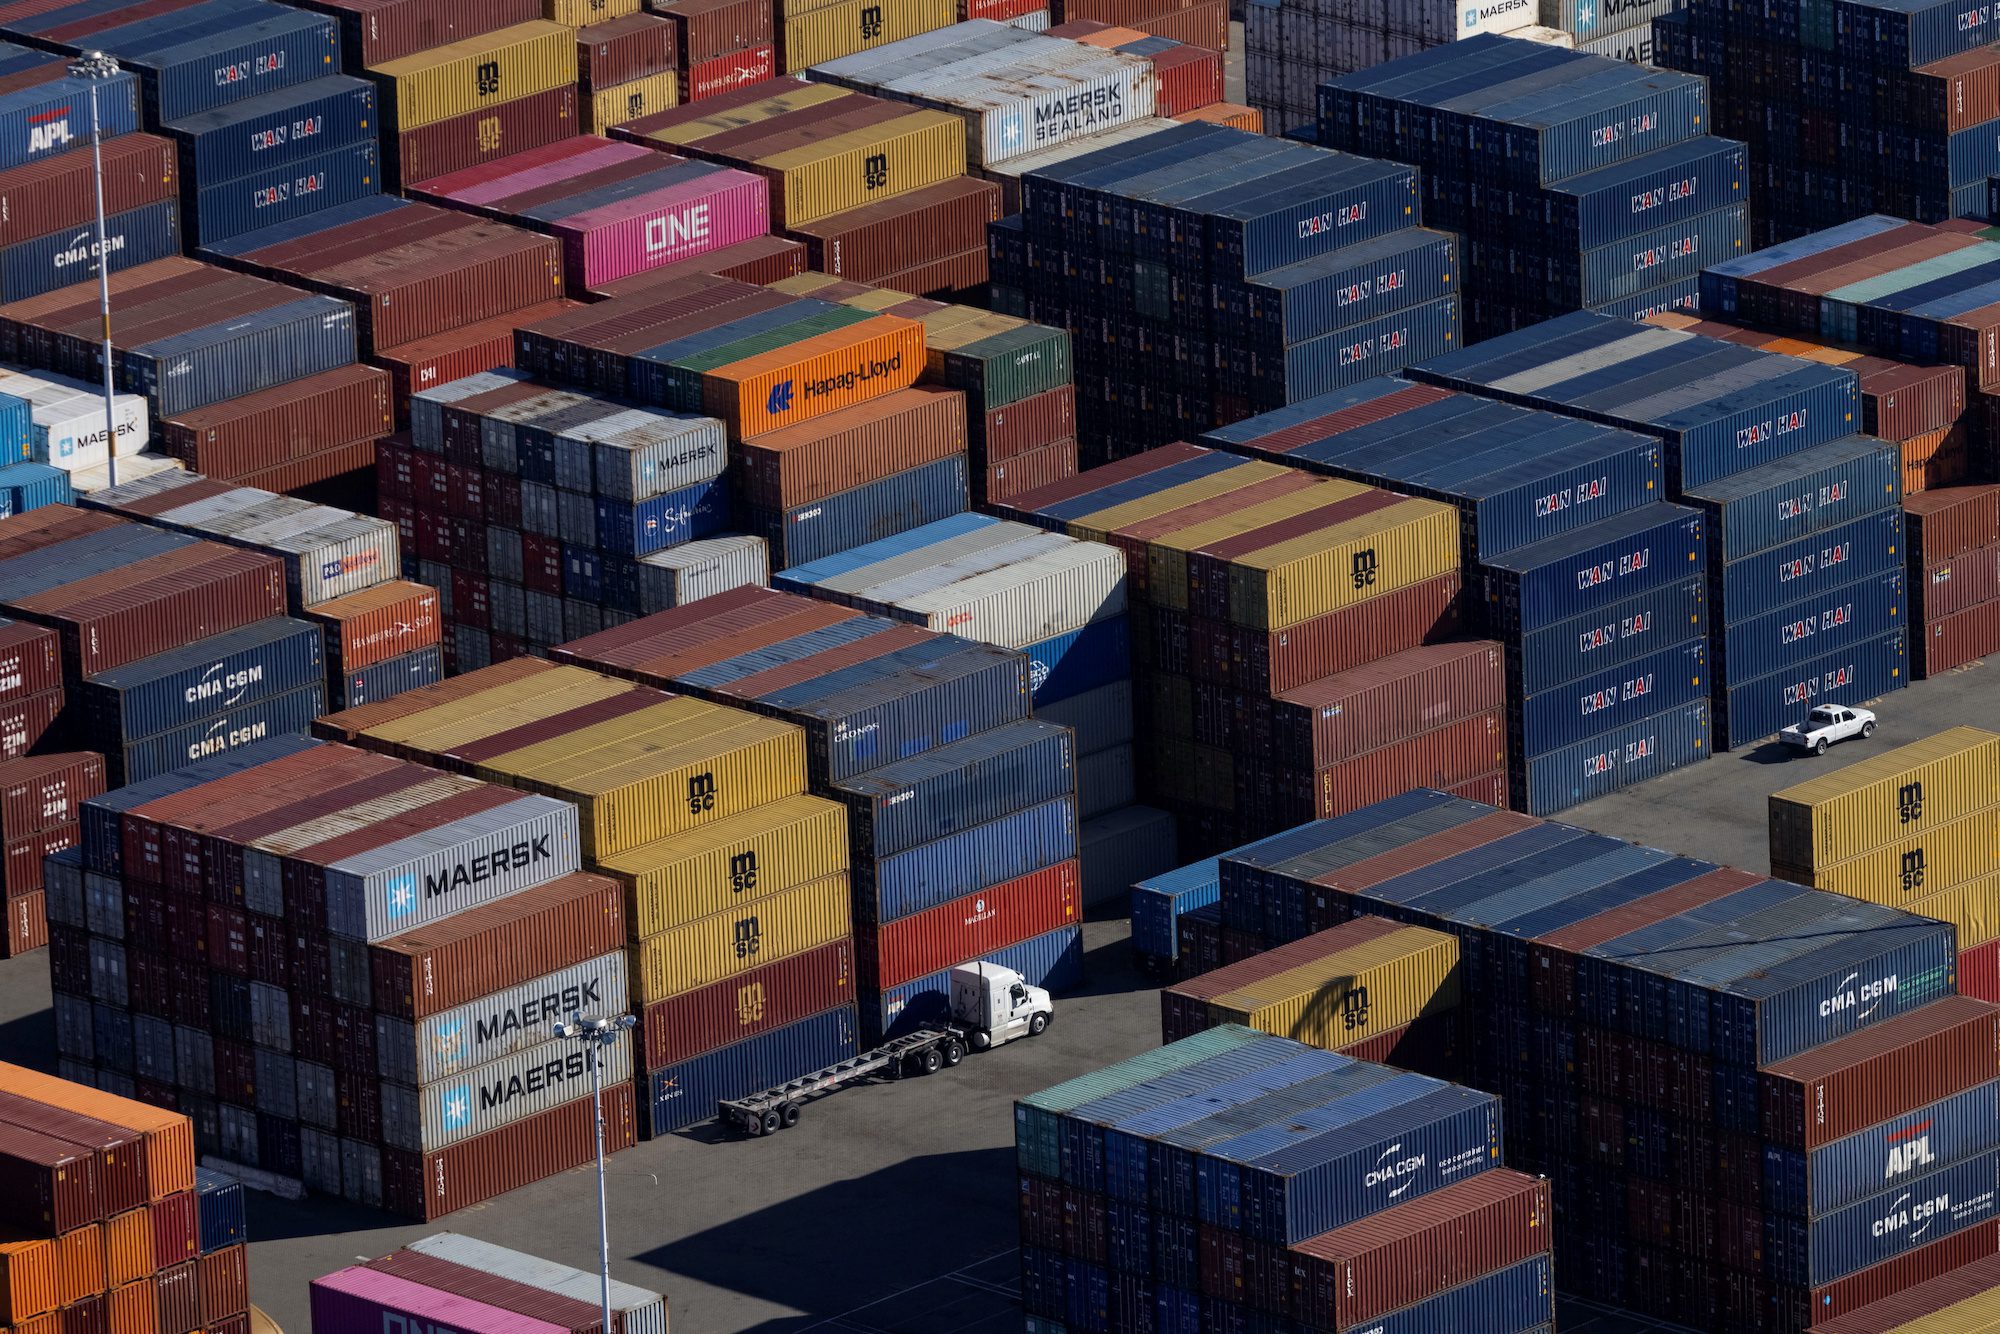 FILE PHOTO: Shipping containers are seen at the container terminal of the port of Oakland, California, U.S., October 28, 2021. REUTERS/Carlos Barria/File Photo